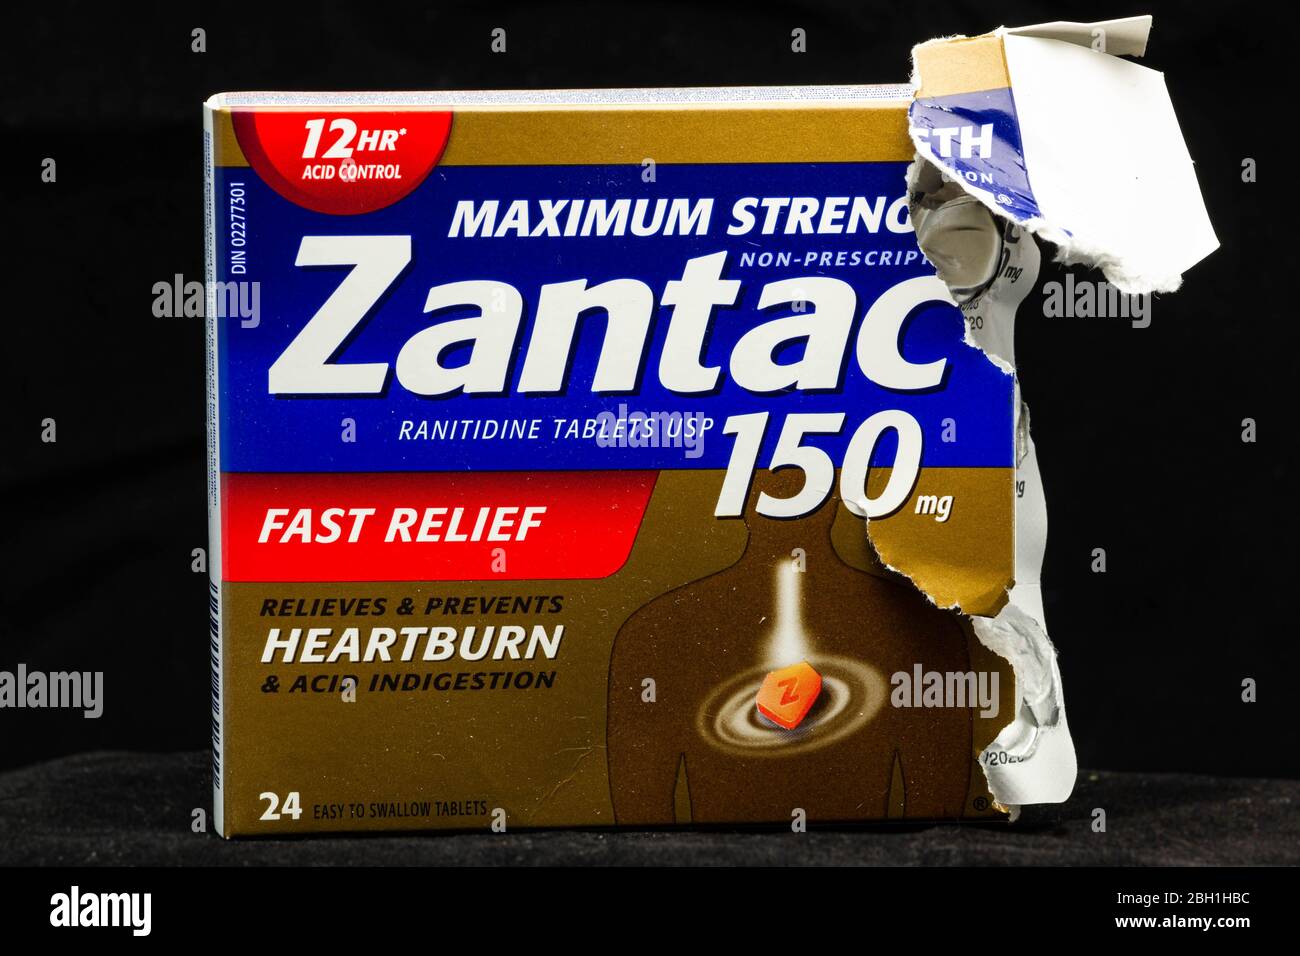 Ranitidine, also known as Zantac, a recalled over-the-counter heartburn relief medication suspected by the FDA to cause serious health problems. Stock Photo